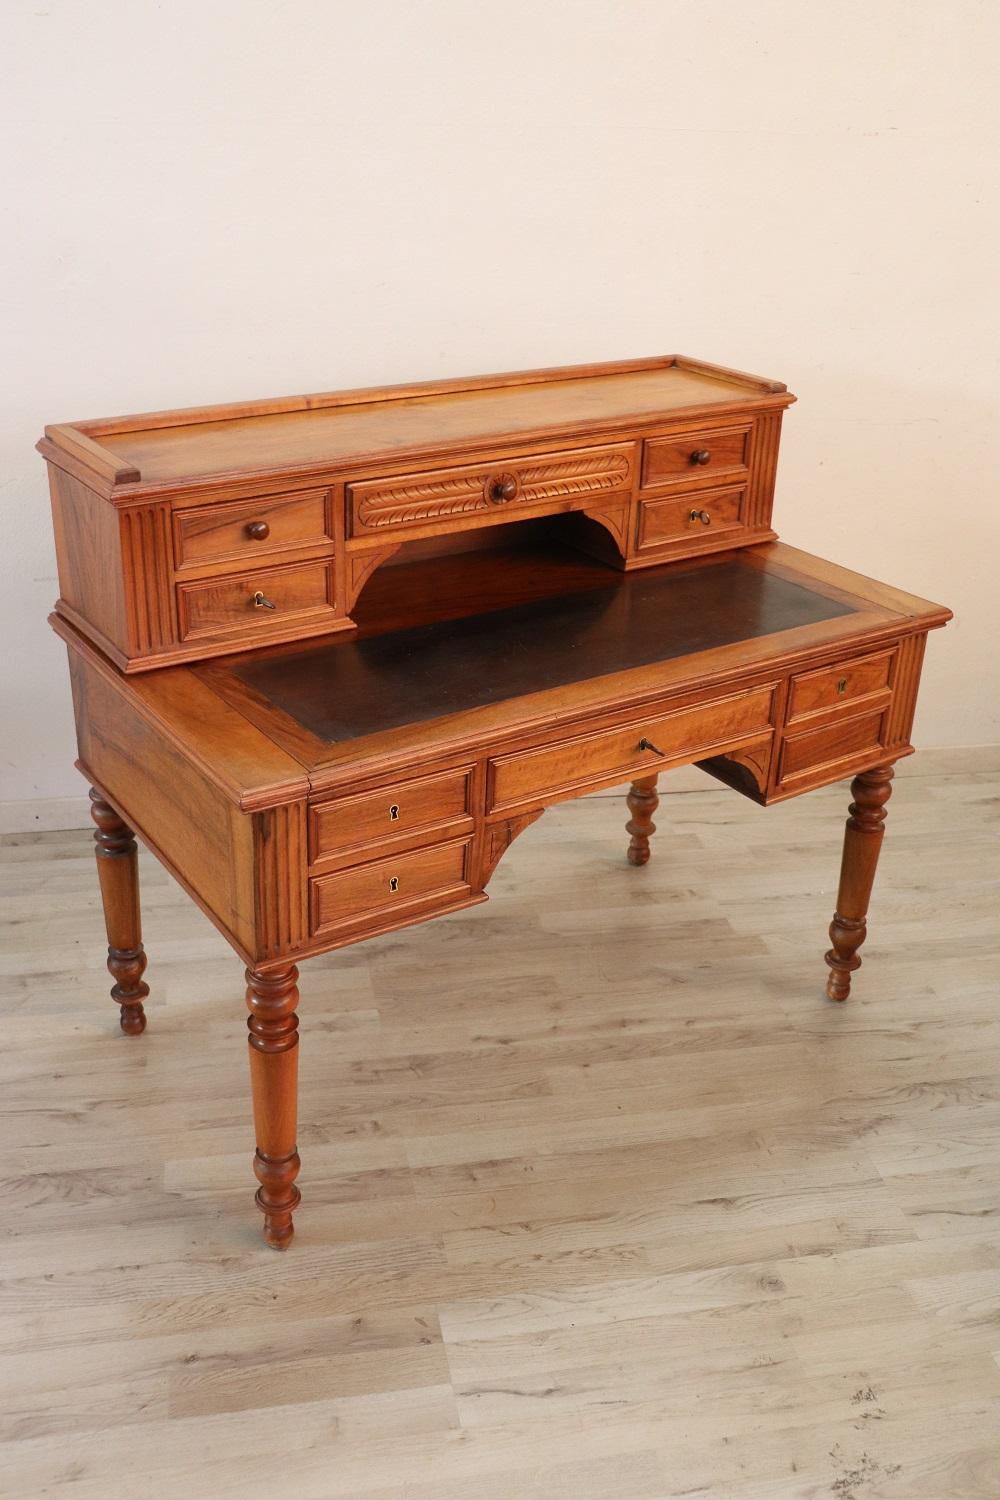 Elegant antique Italian writing desk. Rare and precious solid walnut wood. Comfortable size for a practical use. The desk has elegant turned legs. In the lower part five drawers and in the upper part five smaller drawers. The leather-lined top